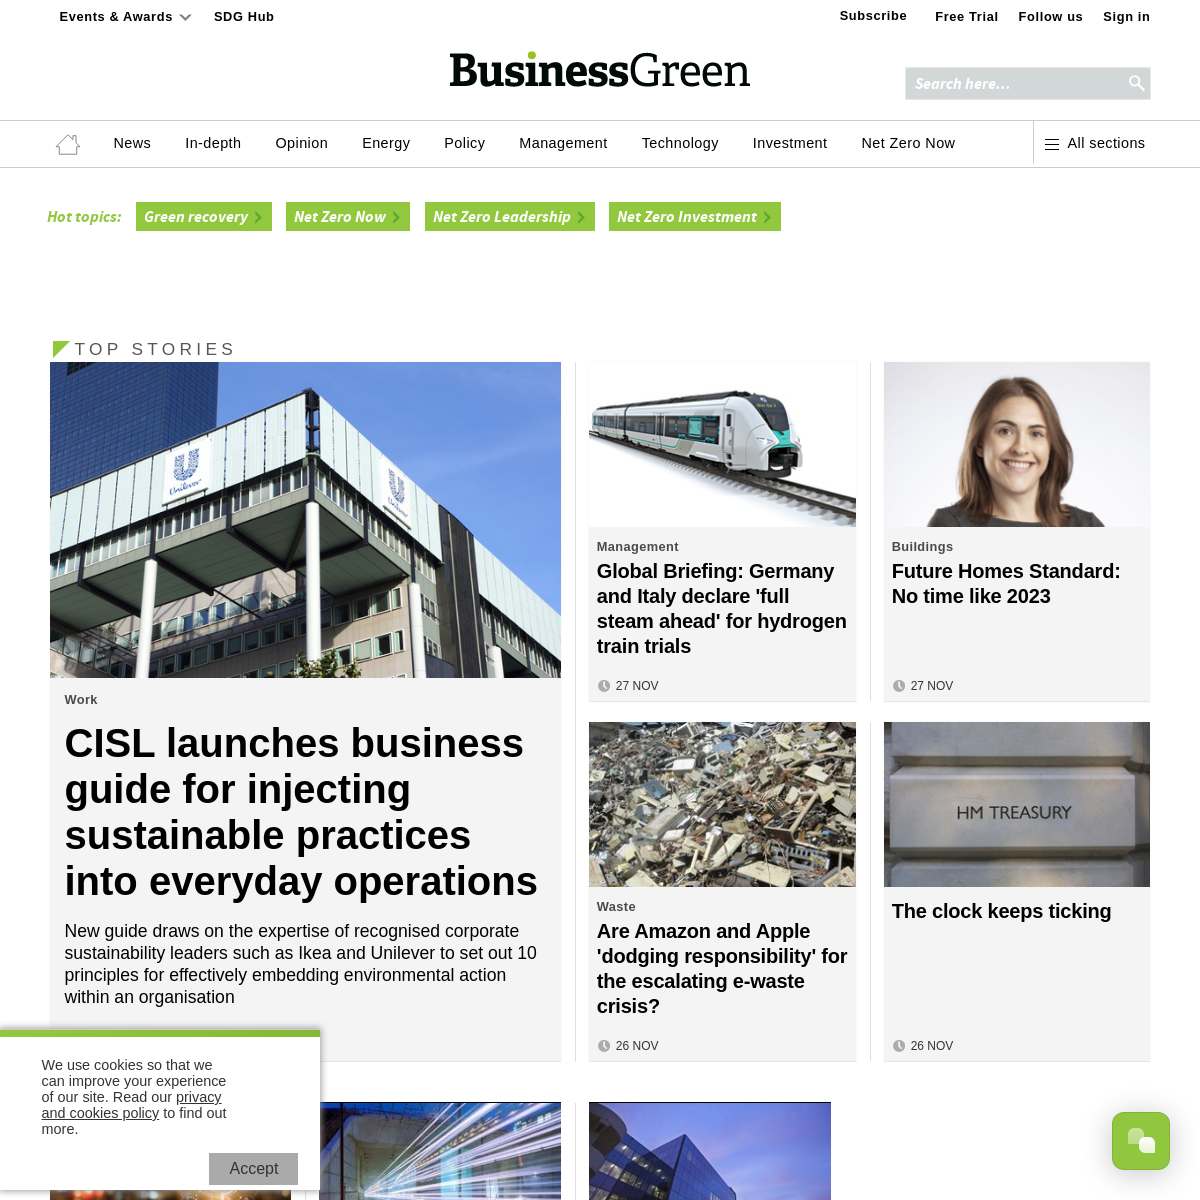 A complete backup of businessgreen.com